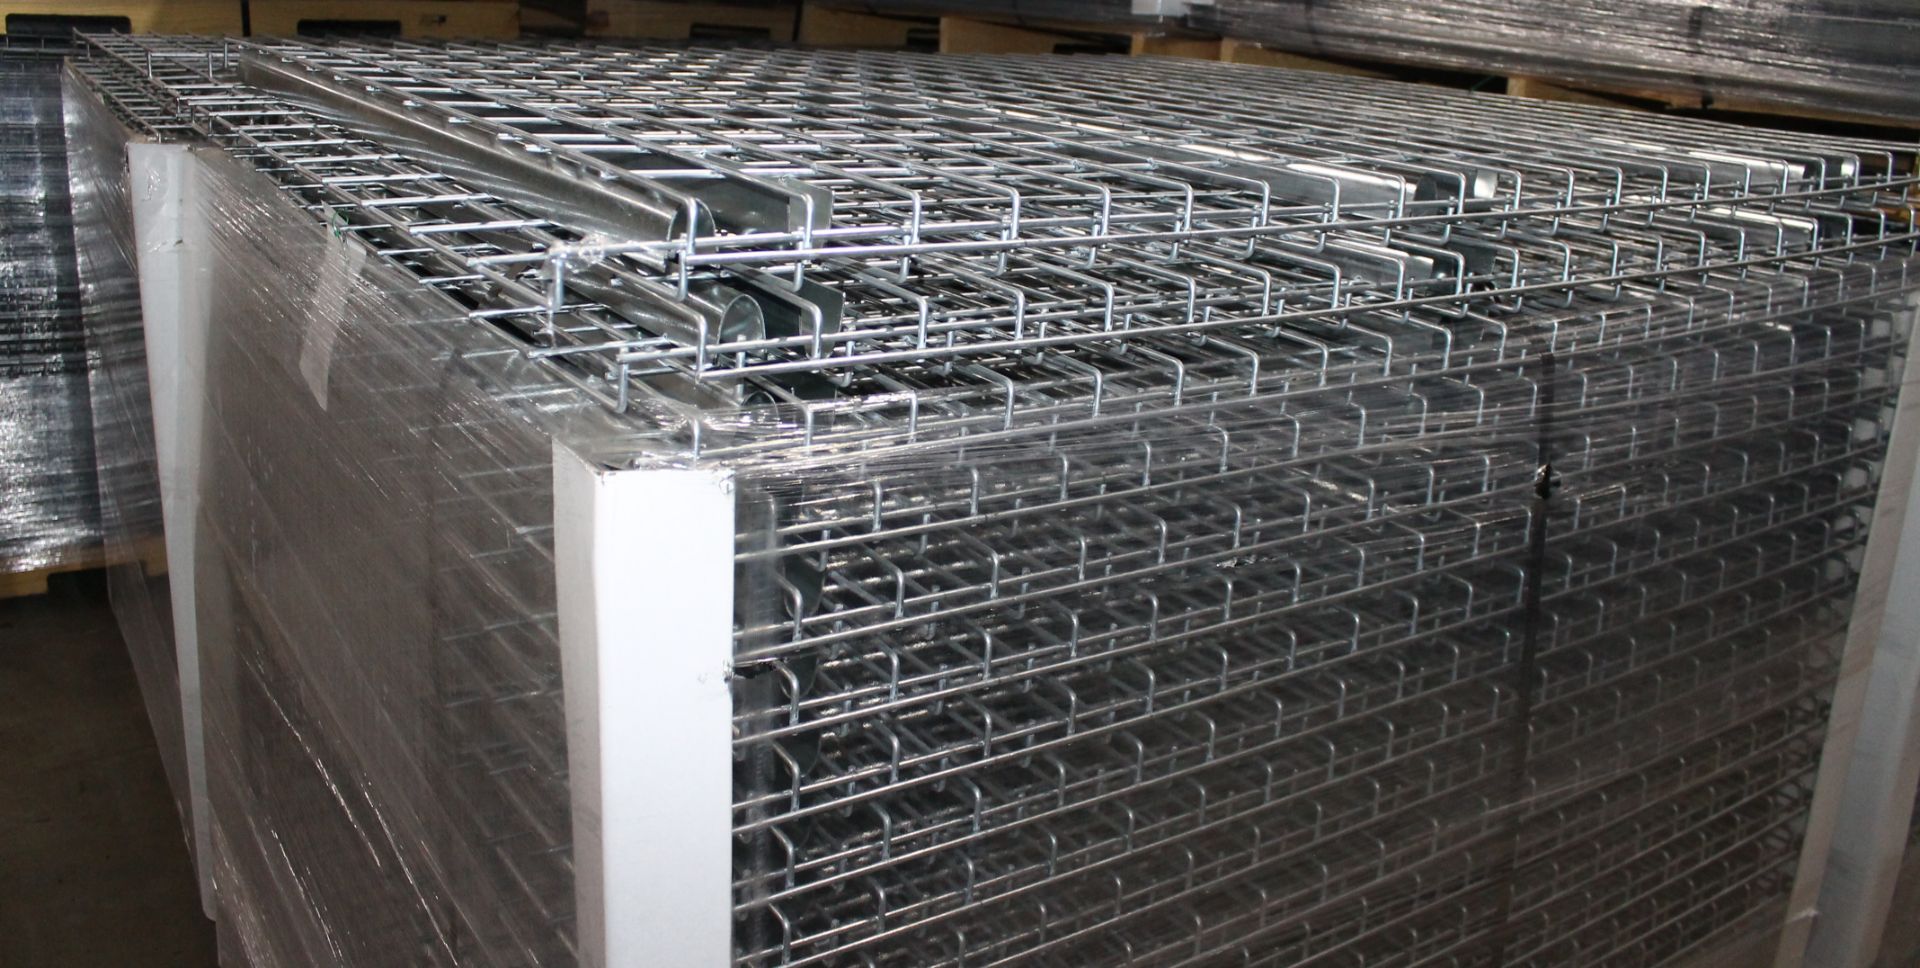 NEW 80 PCS OF STANDARD 48" X 46" WIREDECK - 1900 LBS CAPACITY - Image 2 of 2